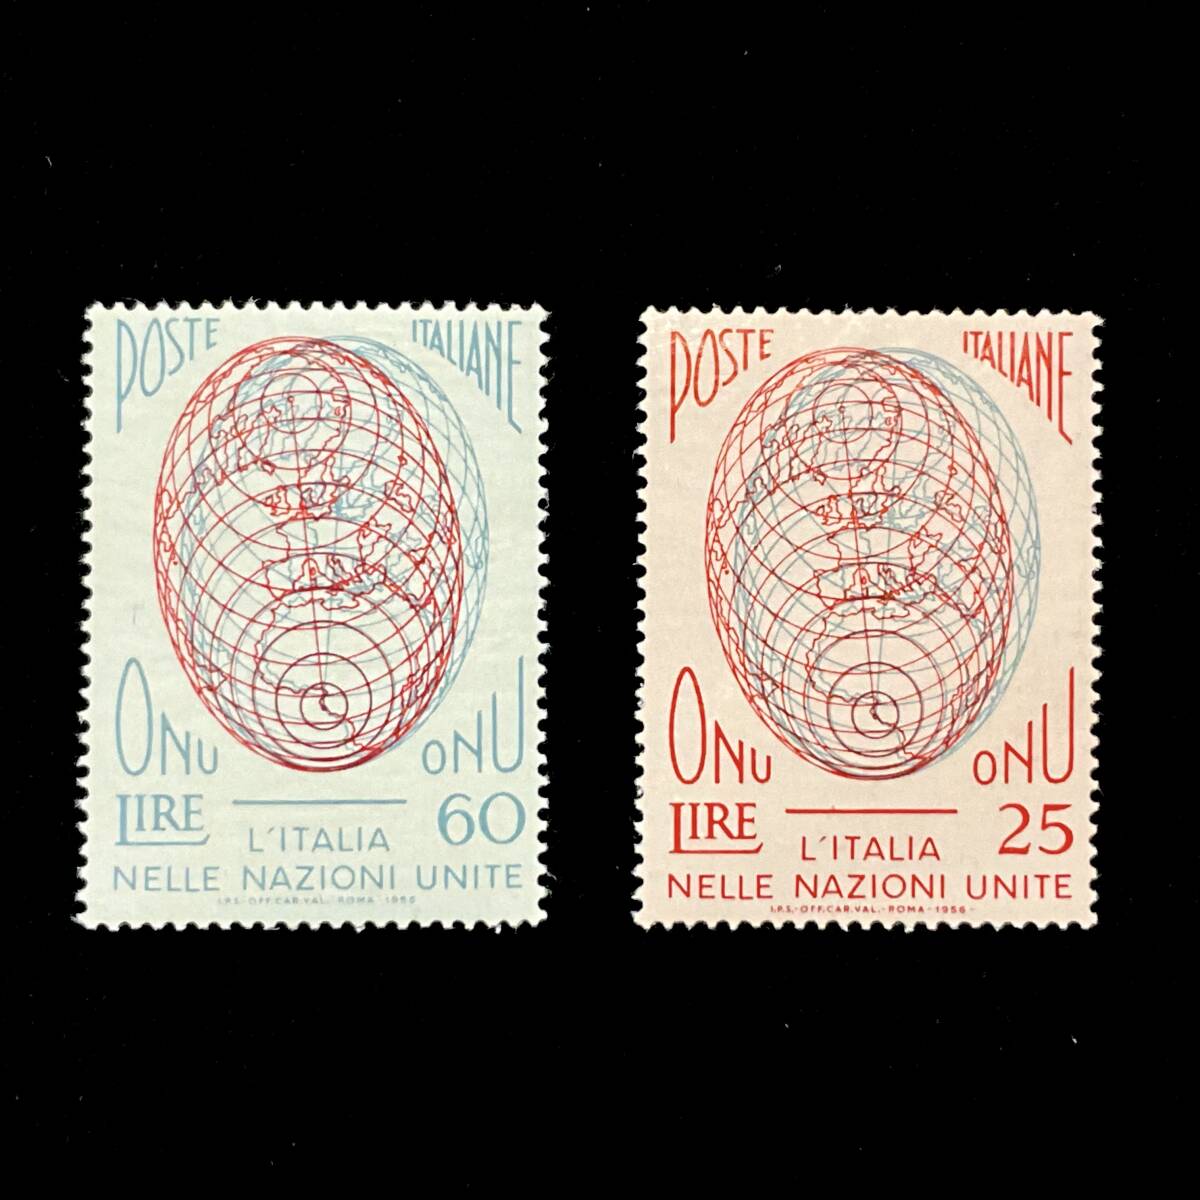  Italy issue [ solid feeling . production make lamp body design ]2 kind . Europe 1956 year 12 month 29 day issue unused stamp 